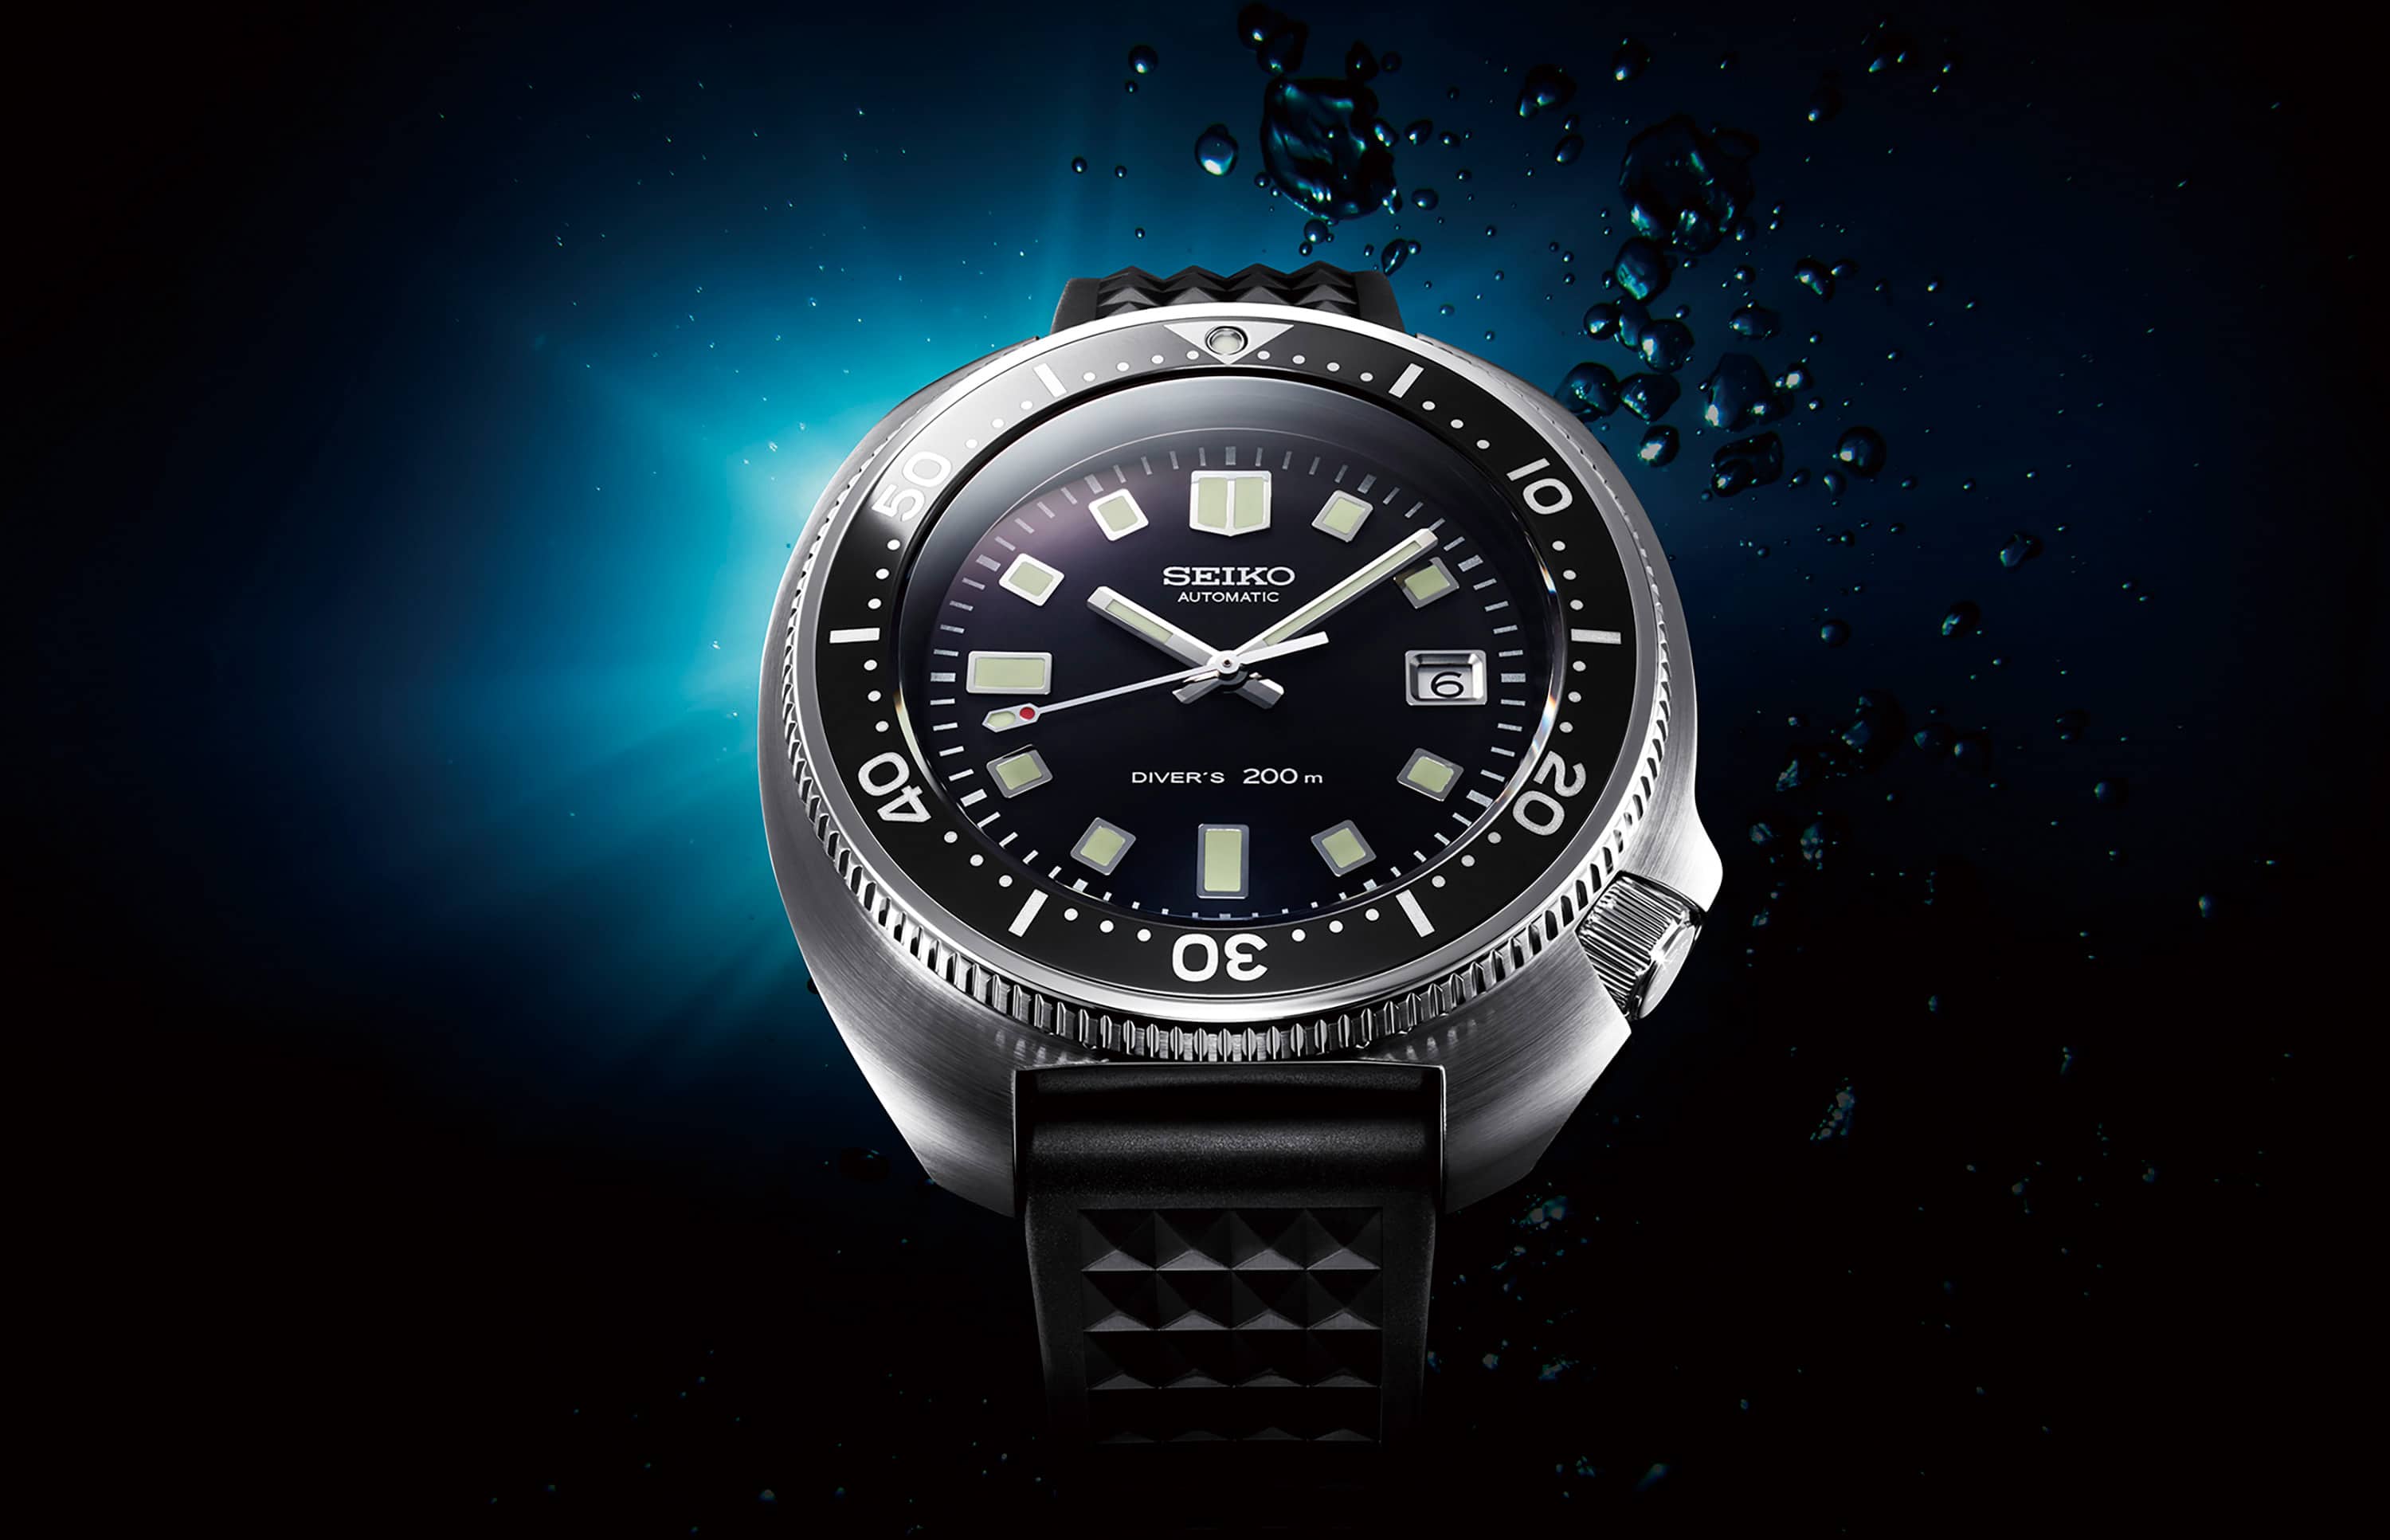 Baselworld 2019: Seiko Brings Back the Legendary 6105 Diver With the Ref.  SLA033 - Worn & Wound